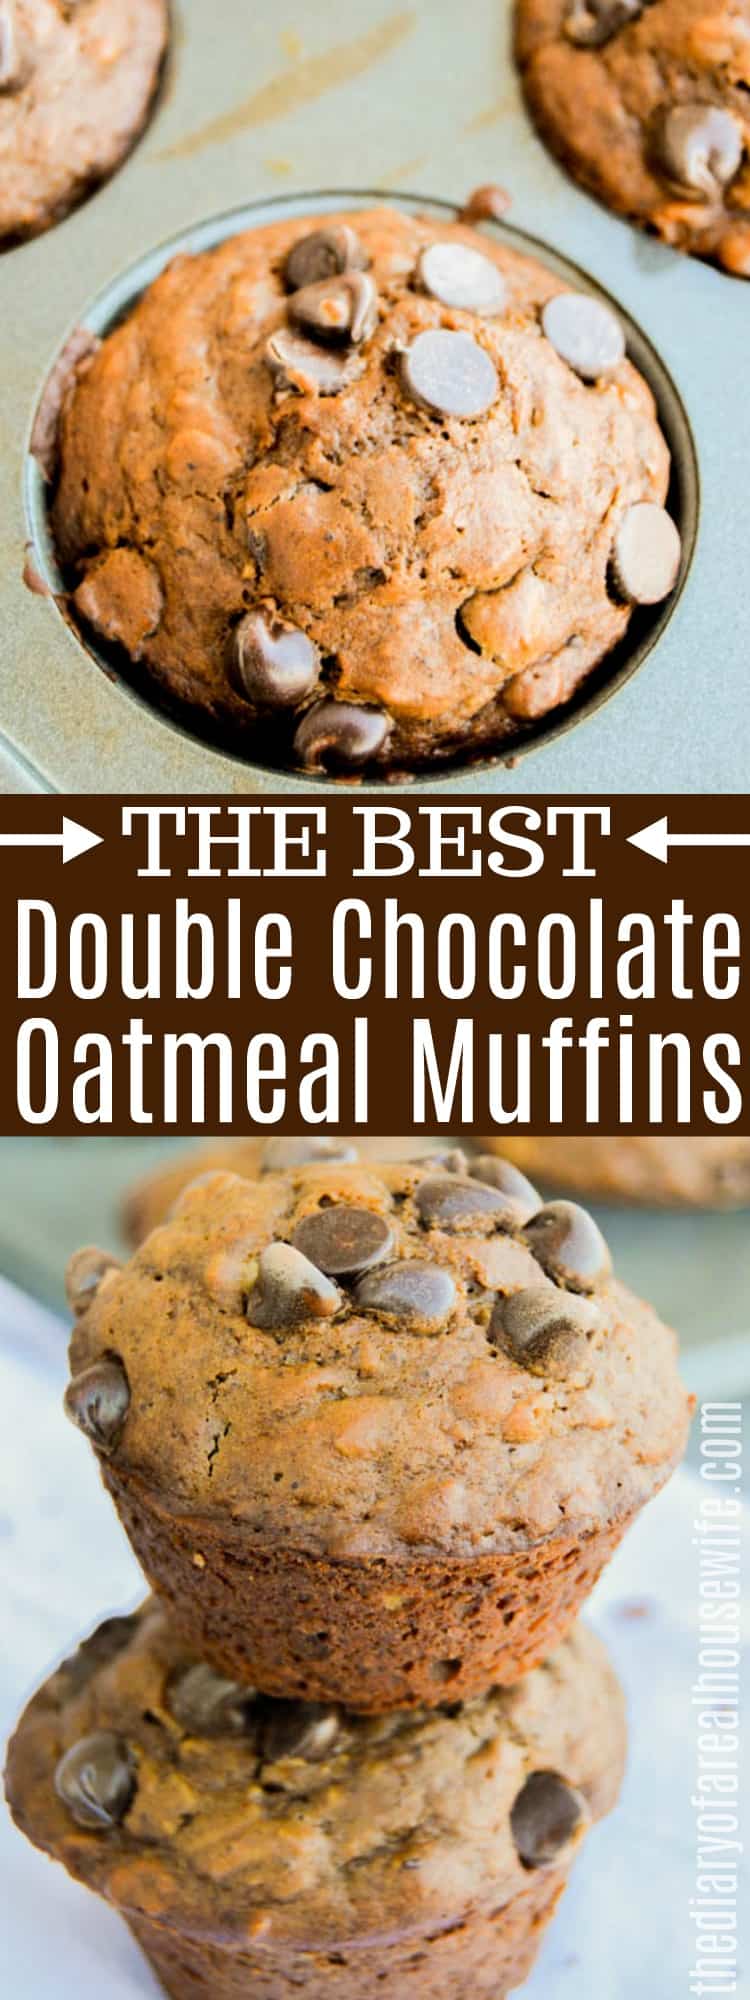 Double Chocolate Oatmeal Muffins